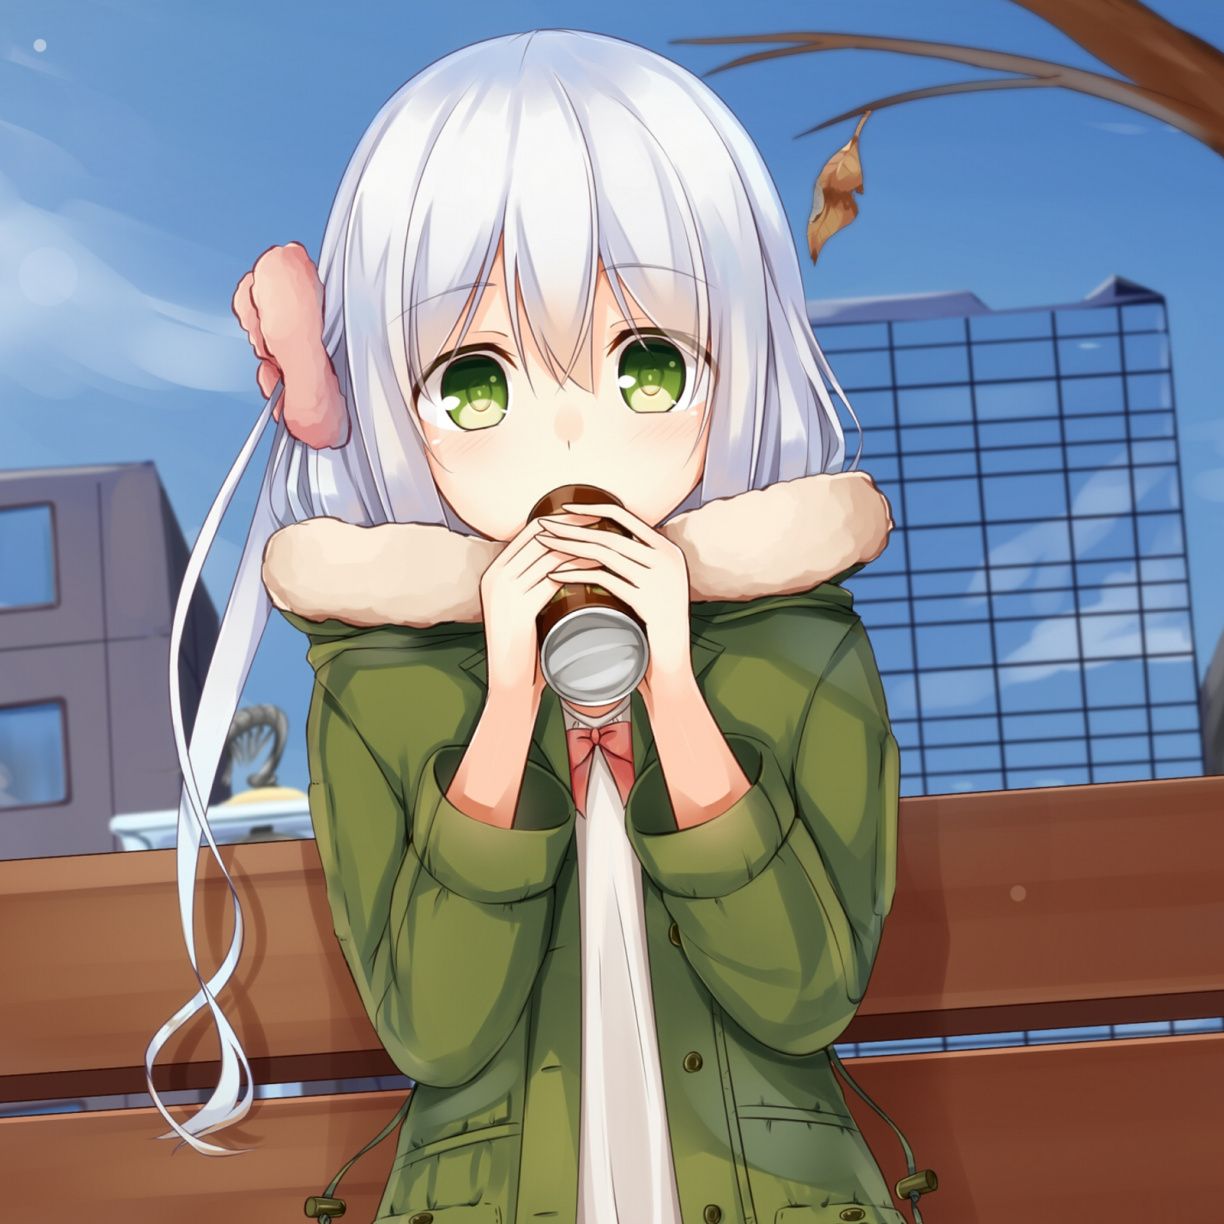 Cute and shy, white hair, anime girl, green eyes wallpaper, 2560x HD image, picture, feb3972c